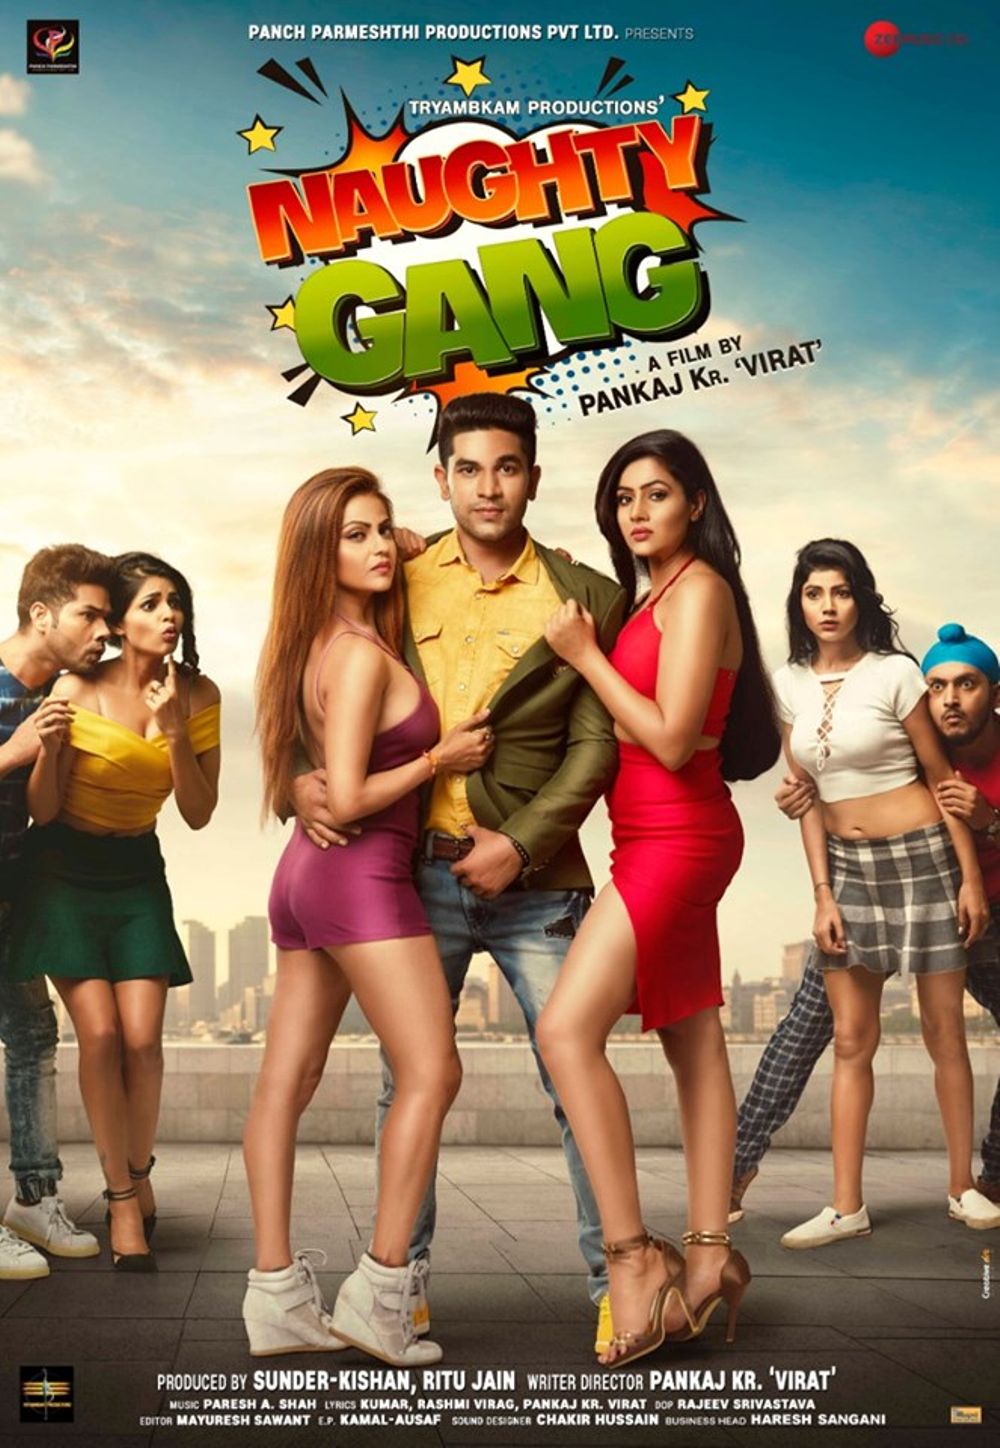 Naughty Gang Movie Review